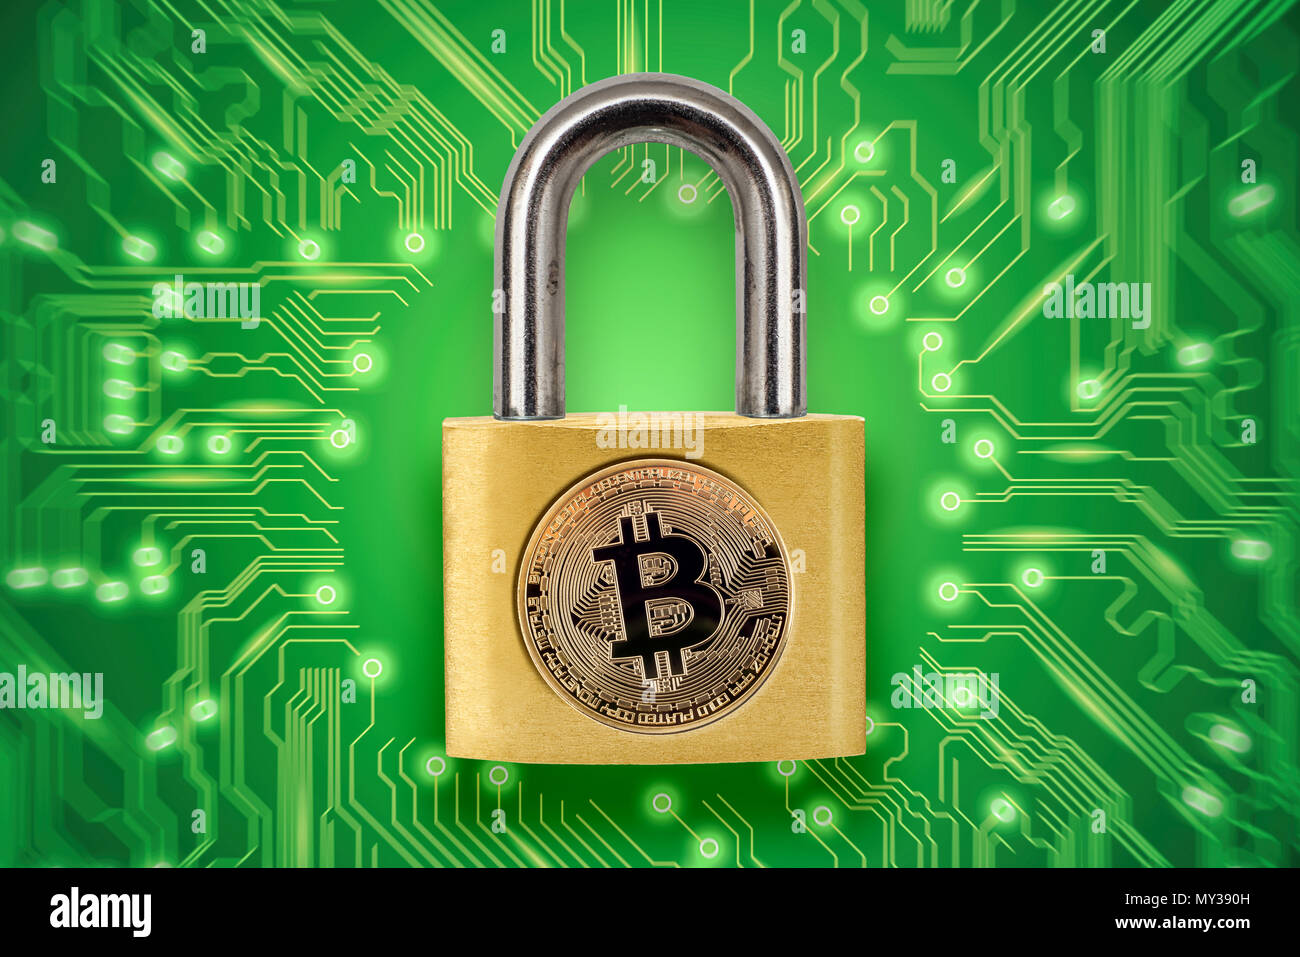 Broken padlock with bitcoin logo. Conceptual picture illustrating crypto currency hacking and theft. Stock Photo